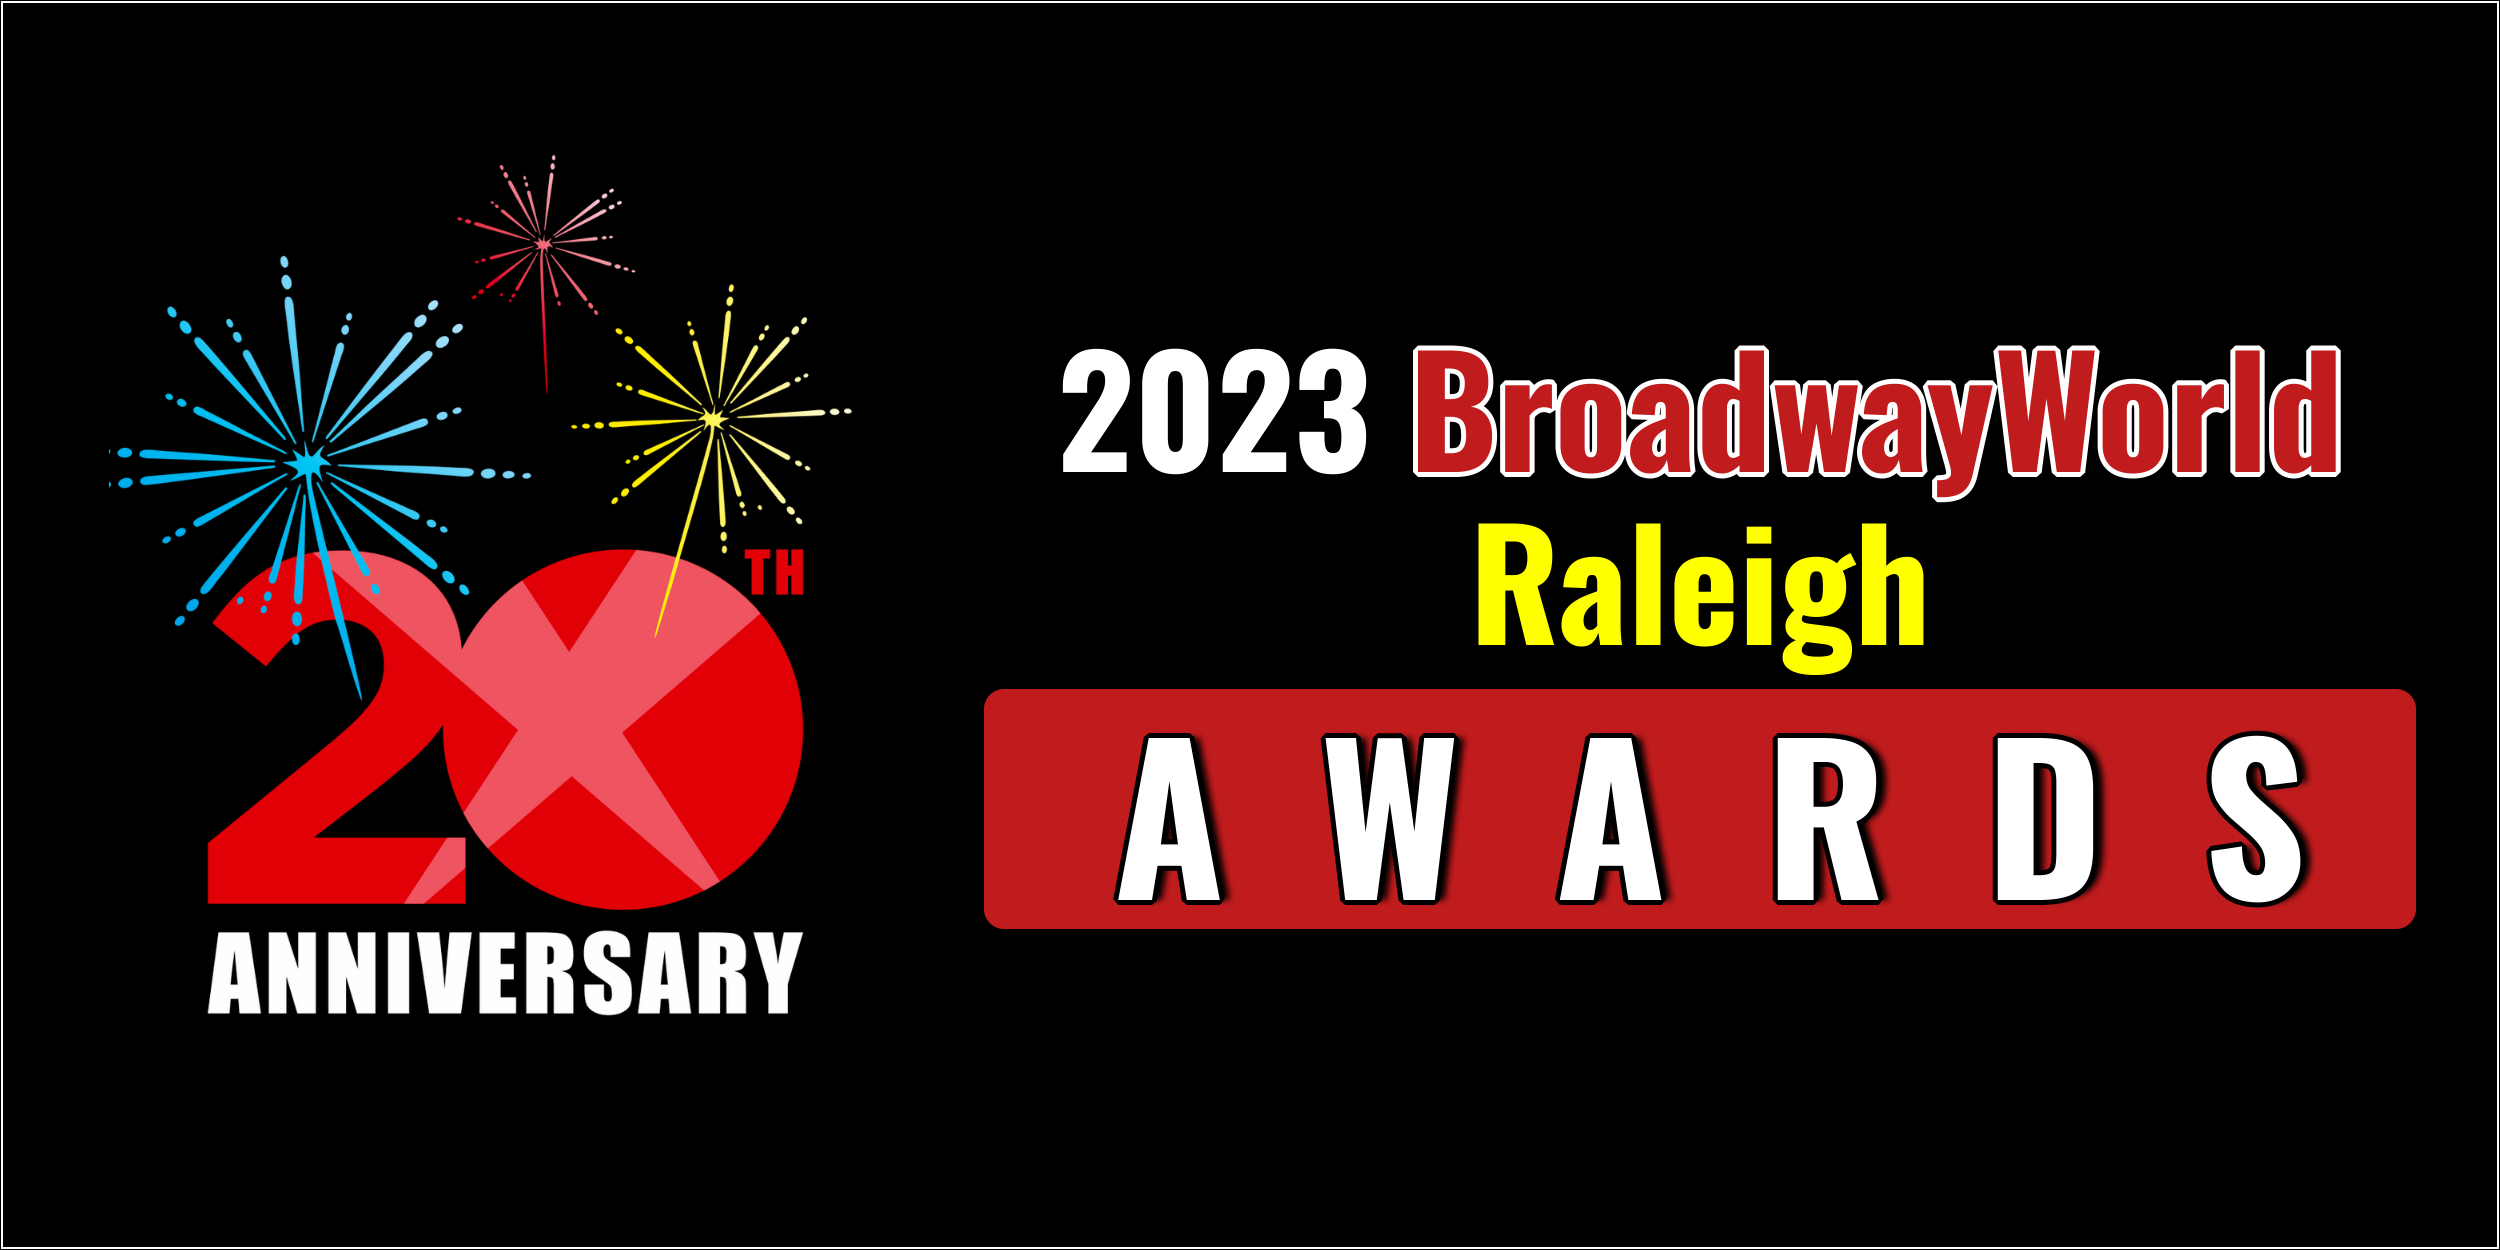 Latest Standings Announced For The 2023 BroadwayWorld Raleigh Awards; A MIDSUMMER NIGHT'S DREAM Leads Best Play! 